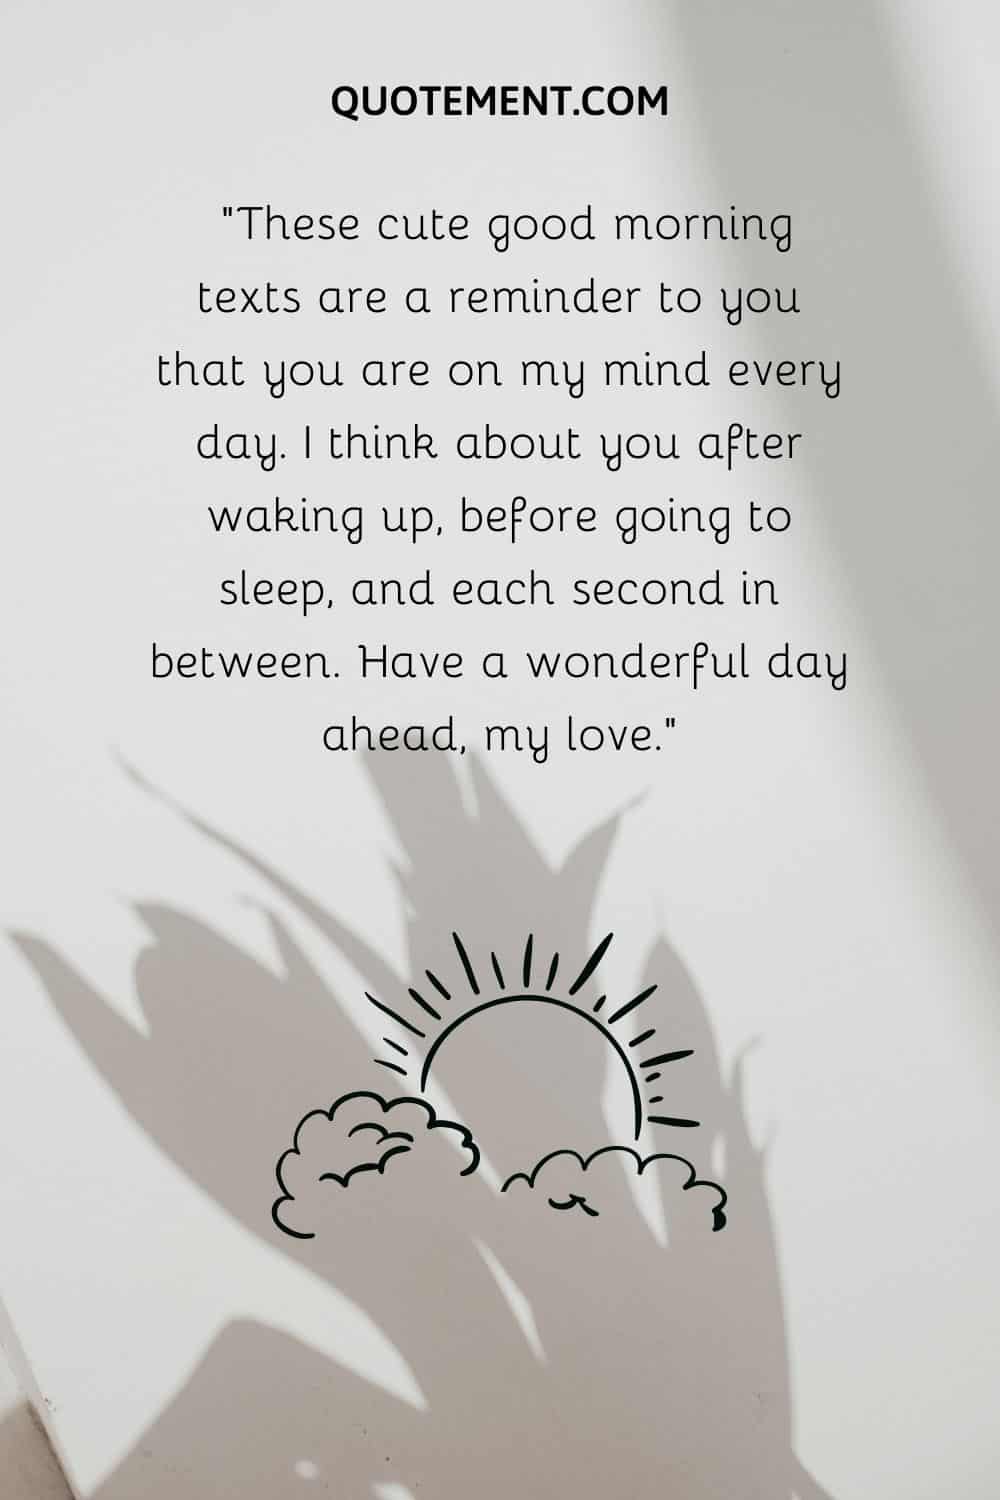 “These cute good morning texts are a reminder to you that you are on my mind every day.”